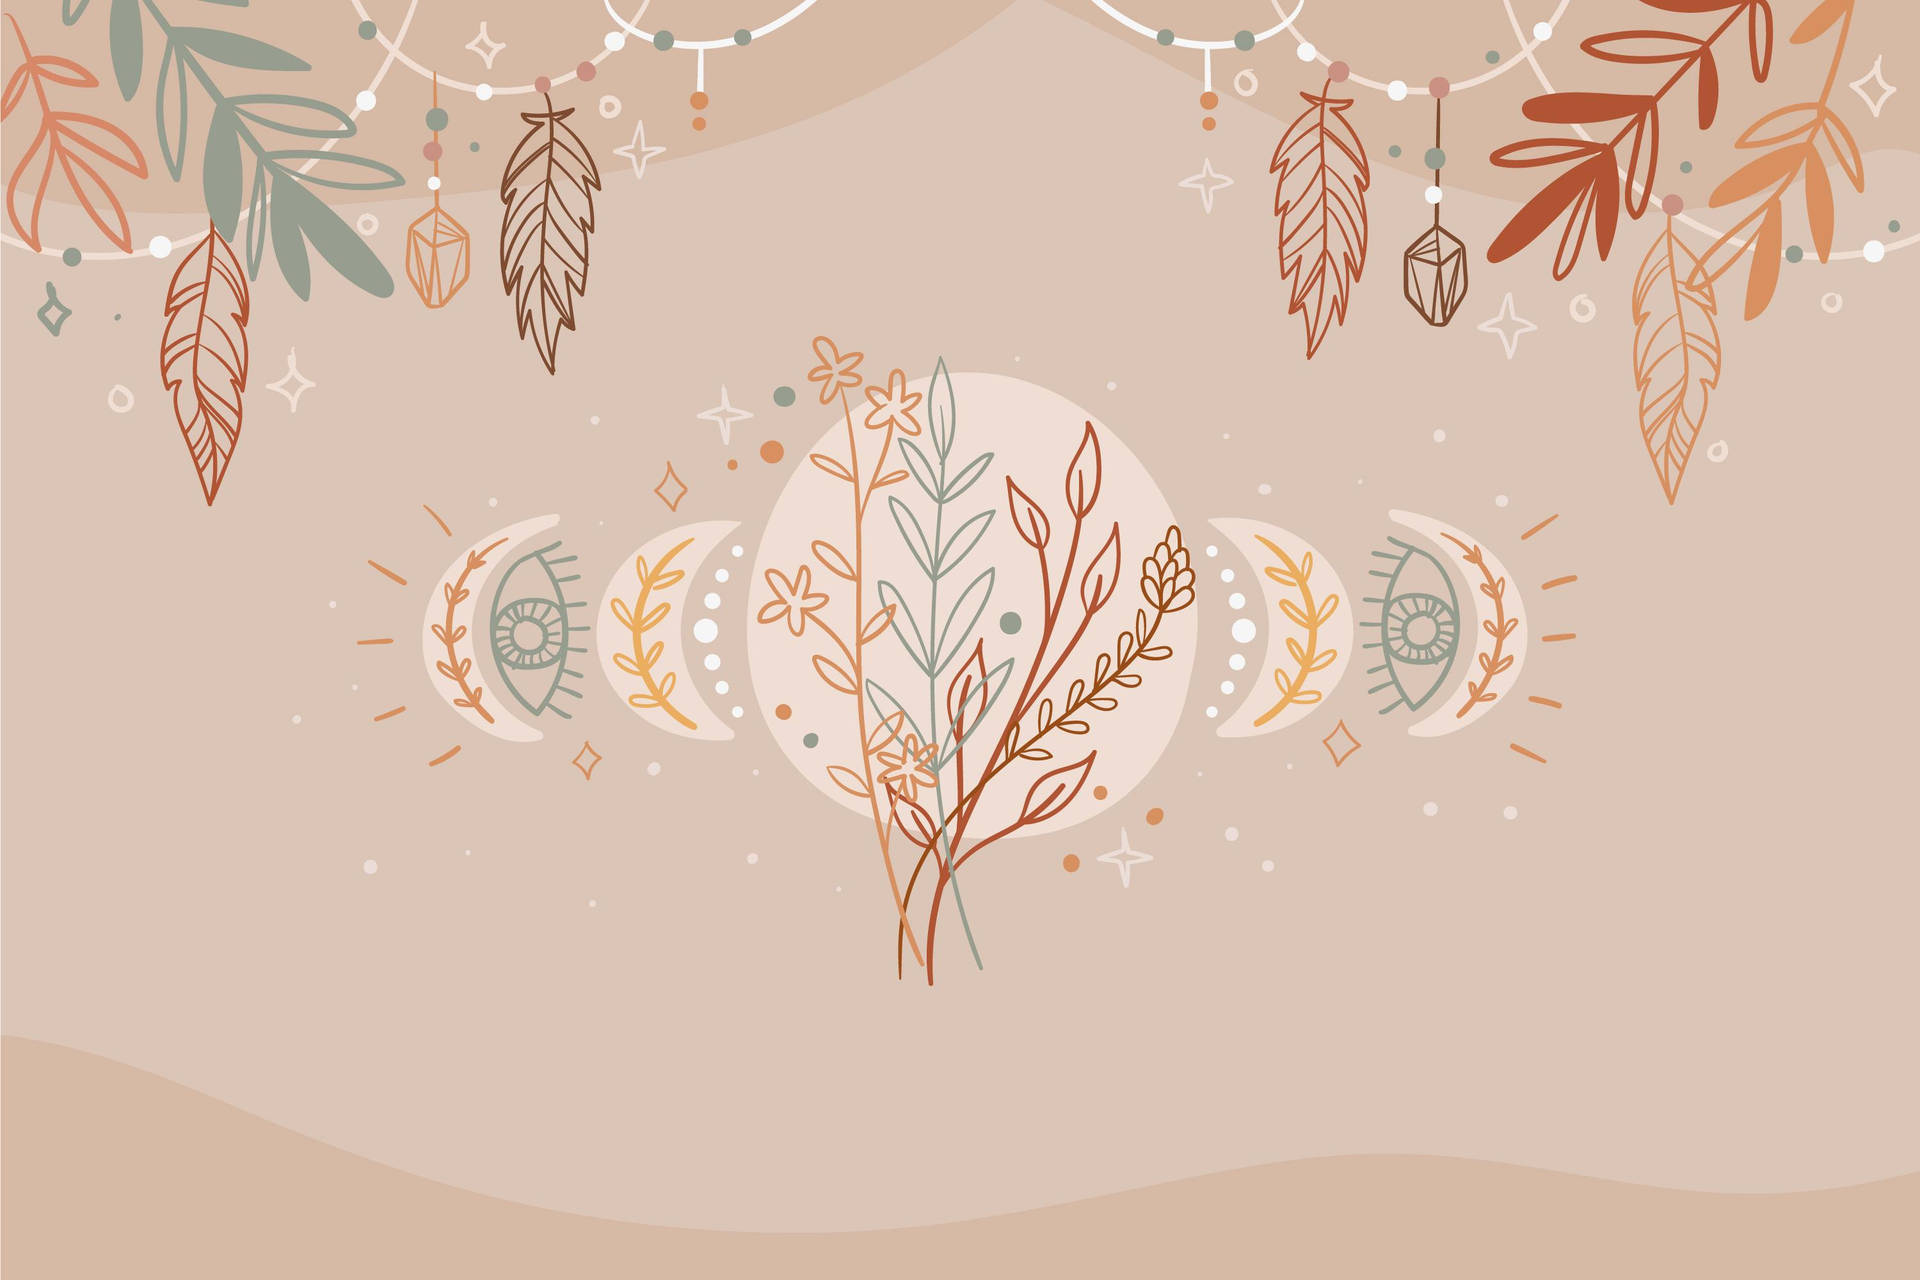 Aesthetic Boho Leaves And Moon Phases Background